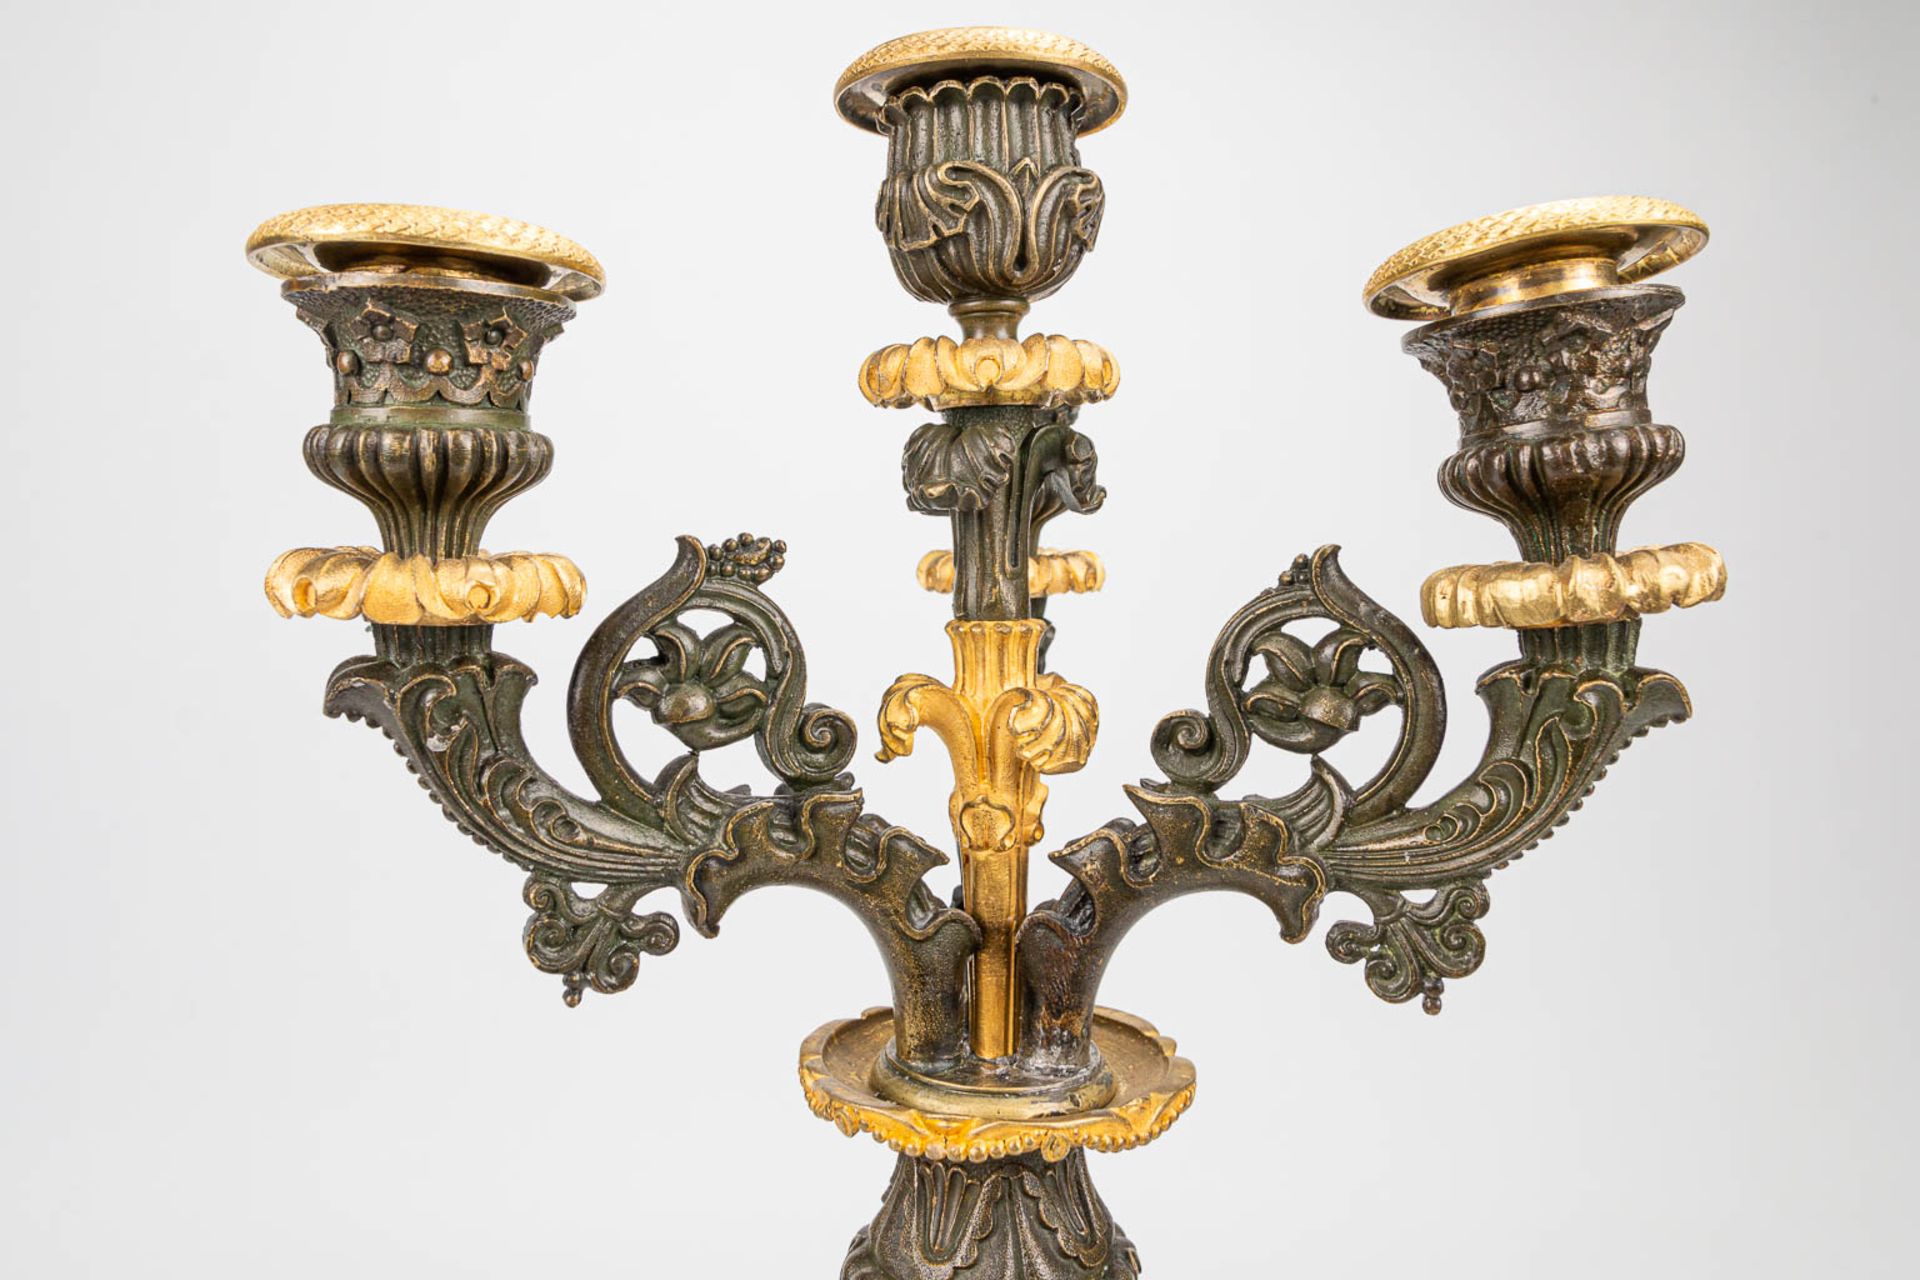 A pair of candelabra with gilt and patinated bronze in empire style, of the period. (16 x 20 x 51 cm - Image 5 of 6